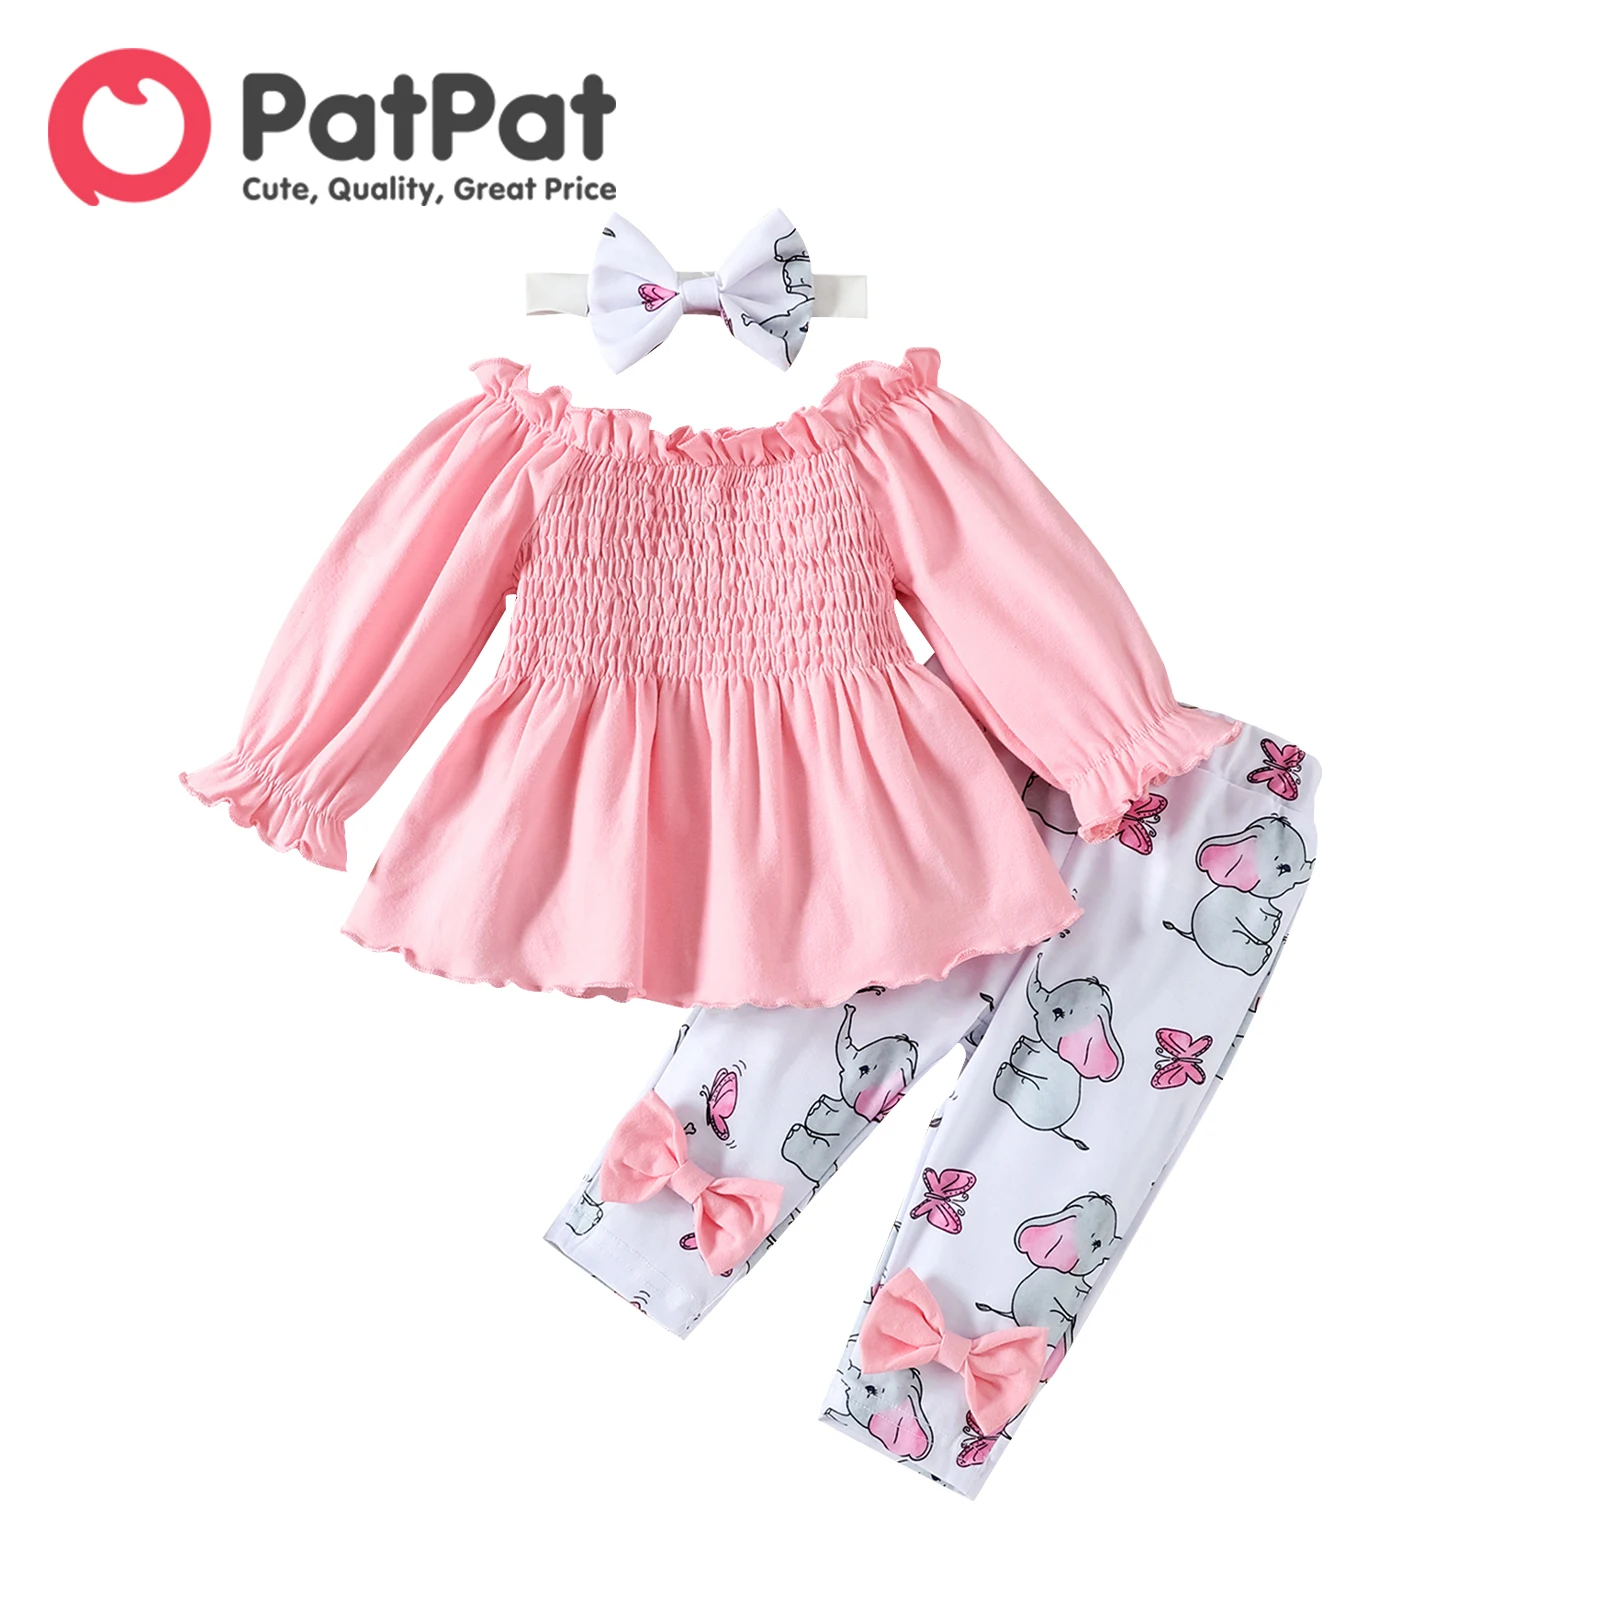 

PatPat Newborn Baby Girl Clothes Babies Items 95% Cotton Frill Off Shoulder Long-sleeve Top Elephant Pants with Headband Set